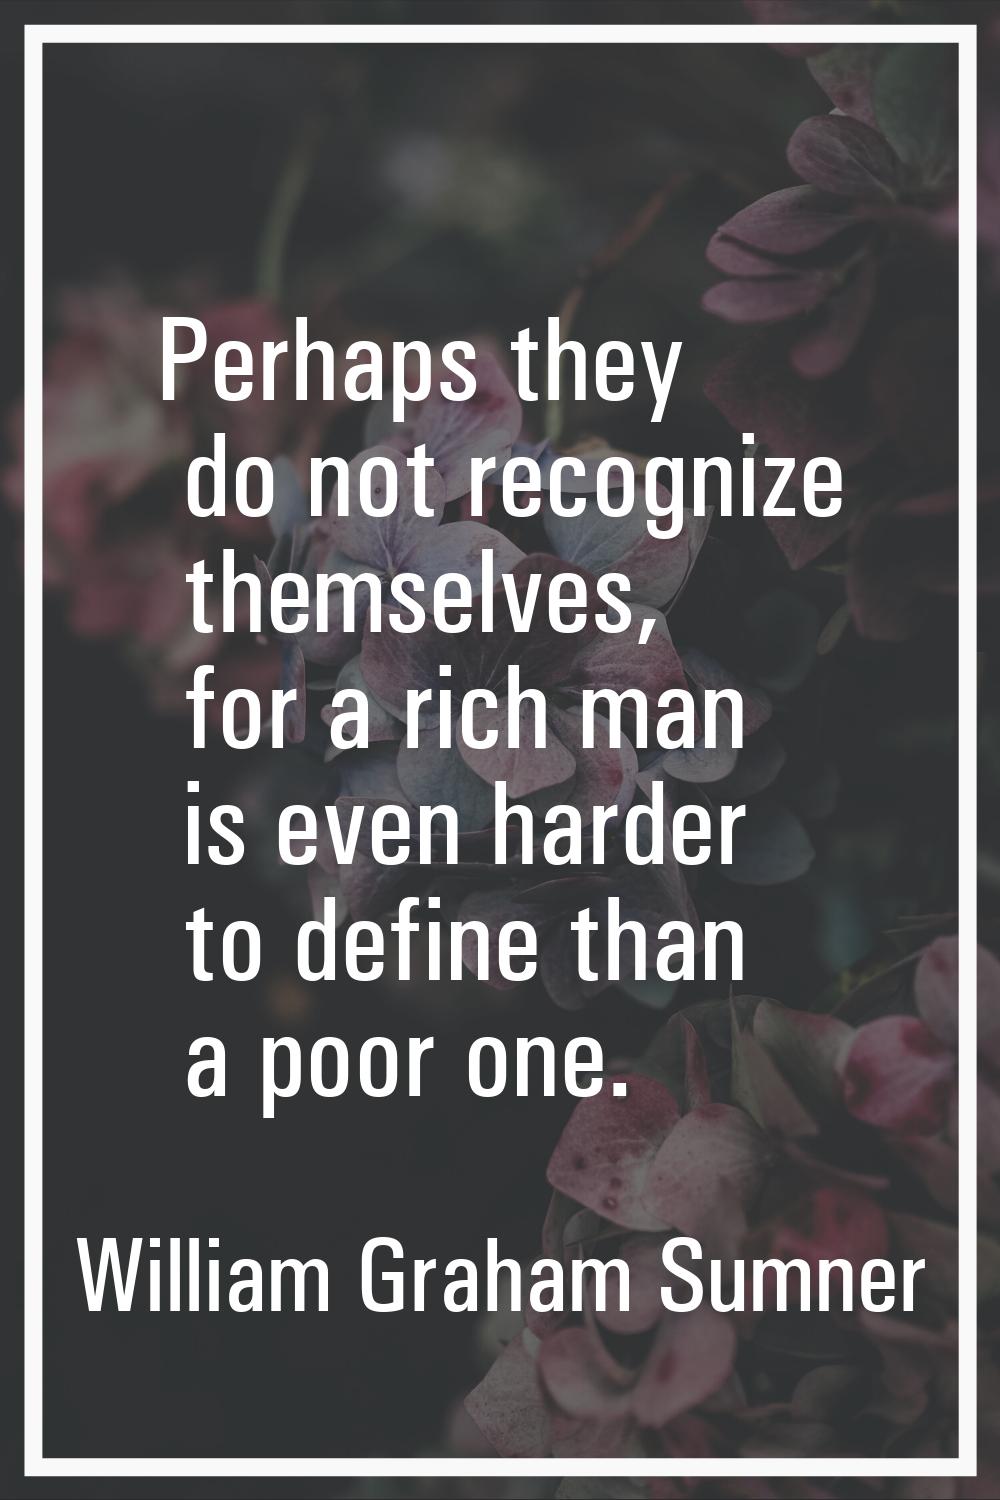 Perhaps they do not recognize themselves, for a rich man is even harder to define than a poor one.